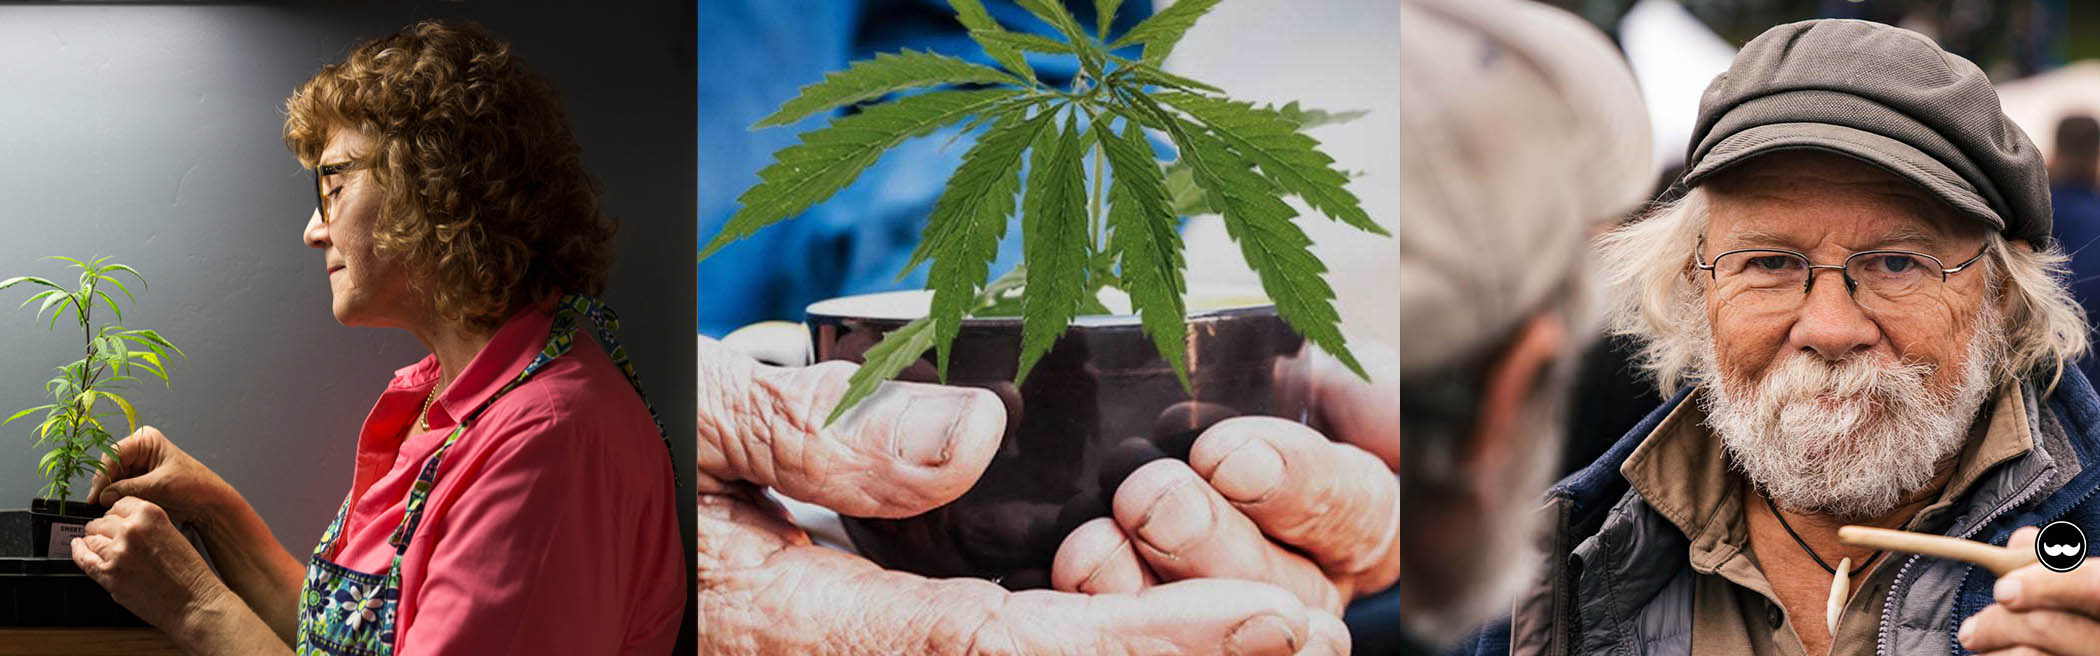 The Definitive Cannabis Guide For Seniors